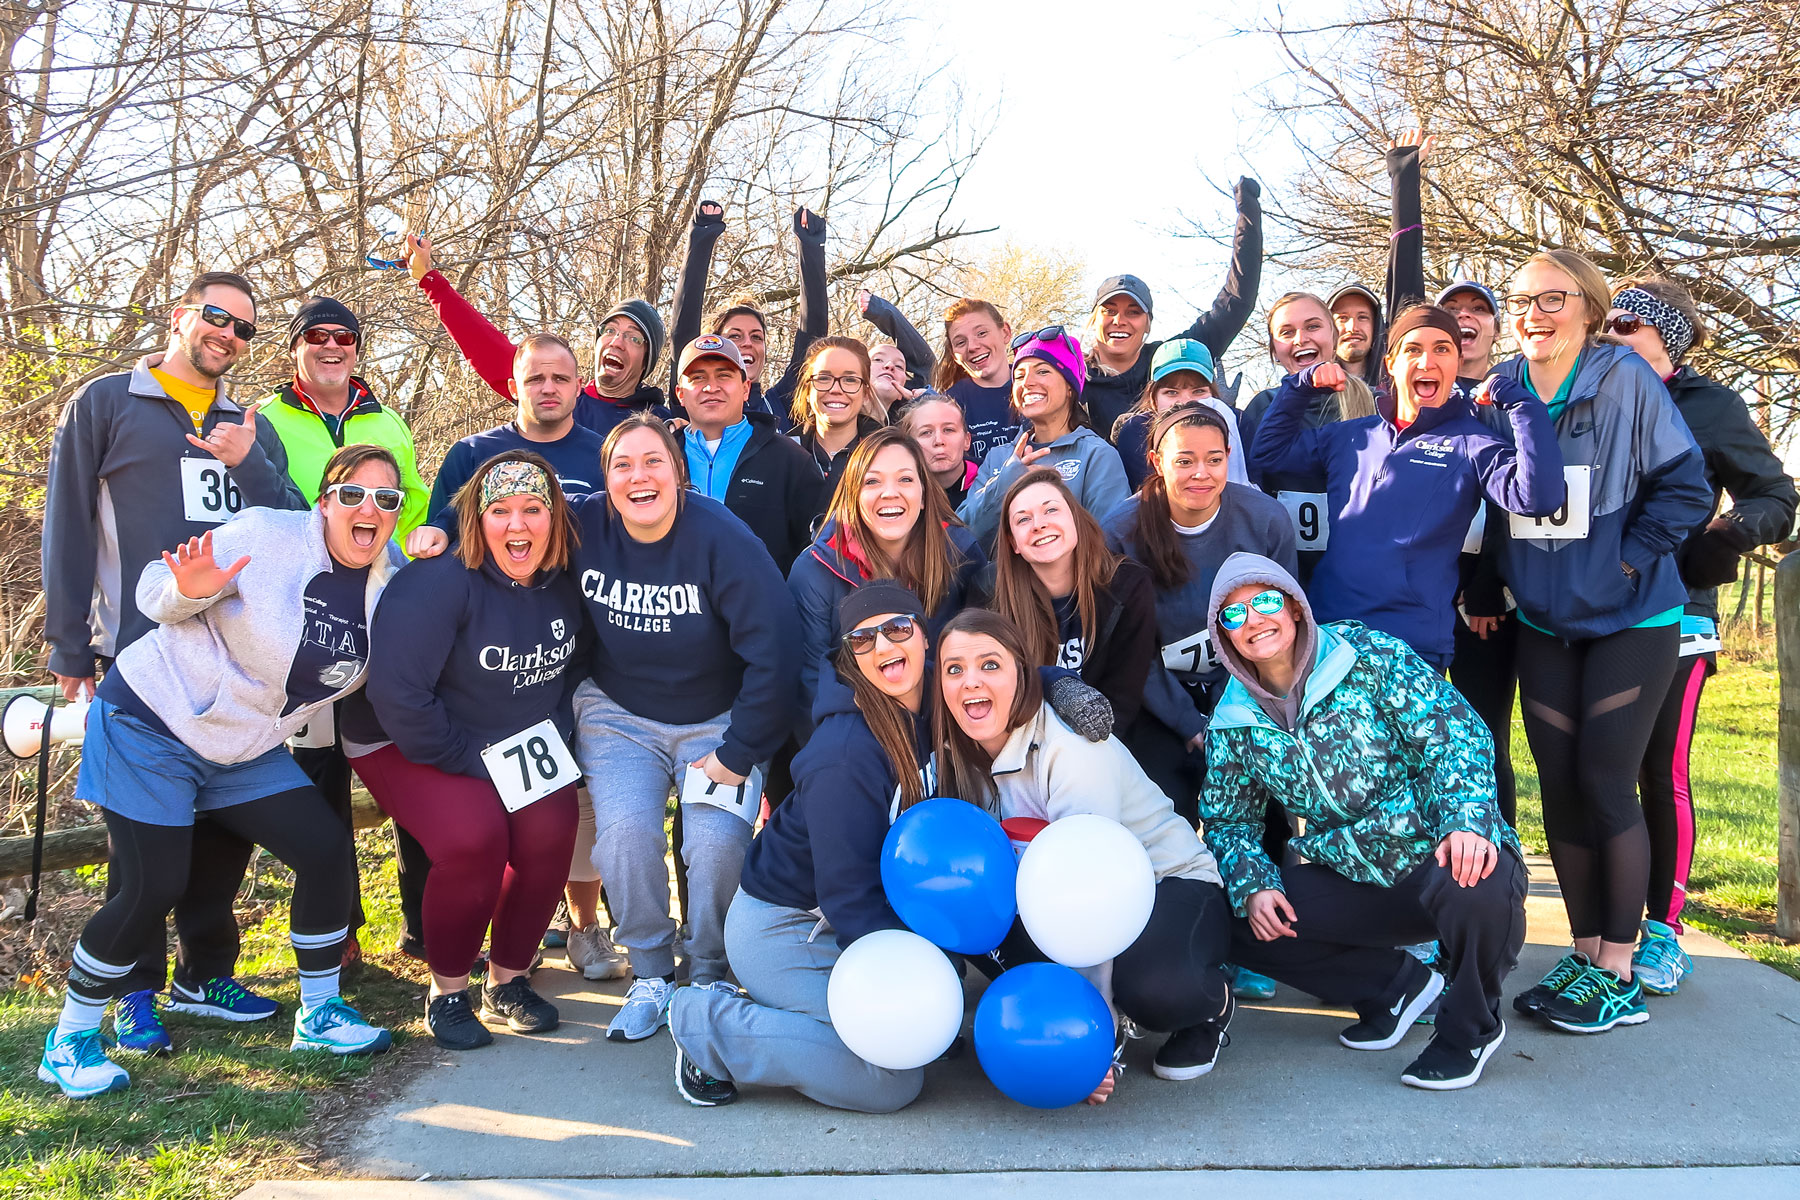 PTA classmates show their enthusiasm for another successful 5K event.